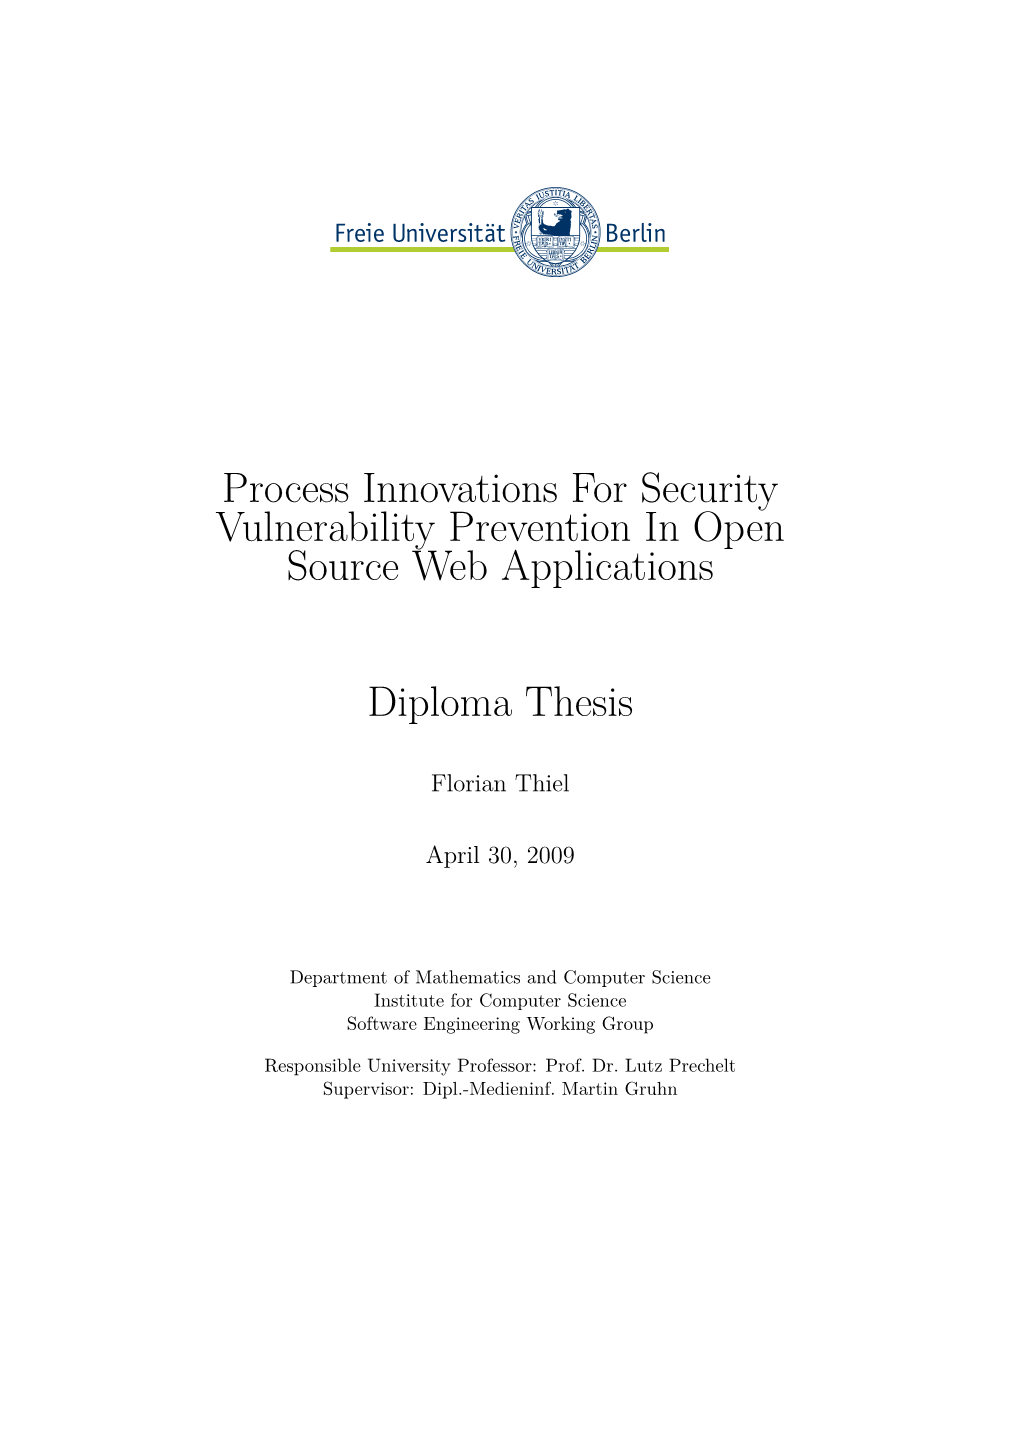 Process Innovations for Security Vulnerability Prevention in Open Source Web Applications